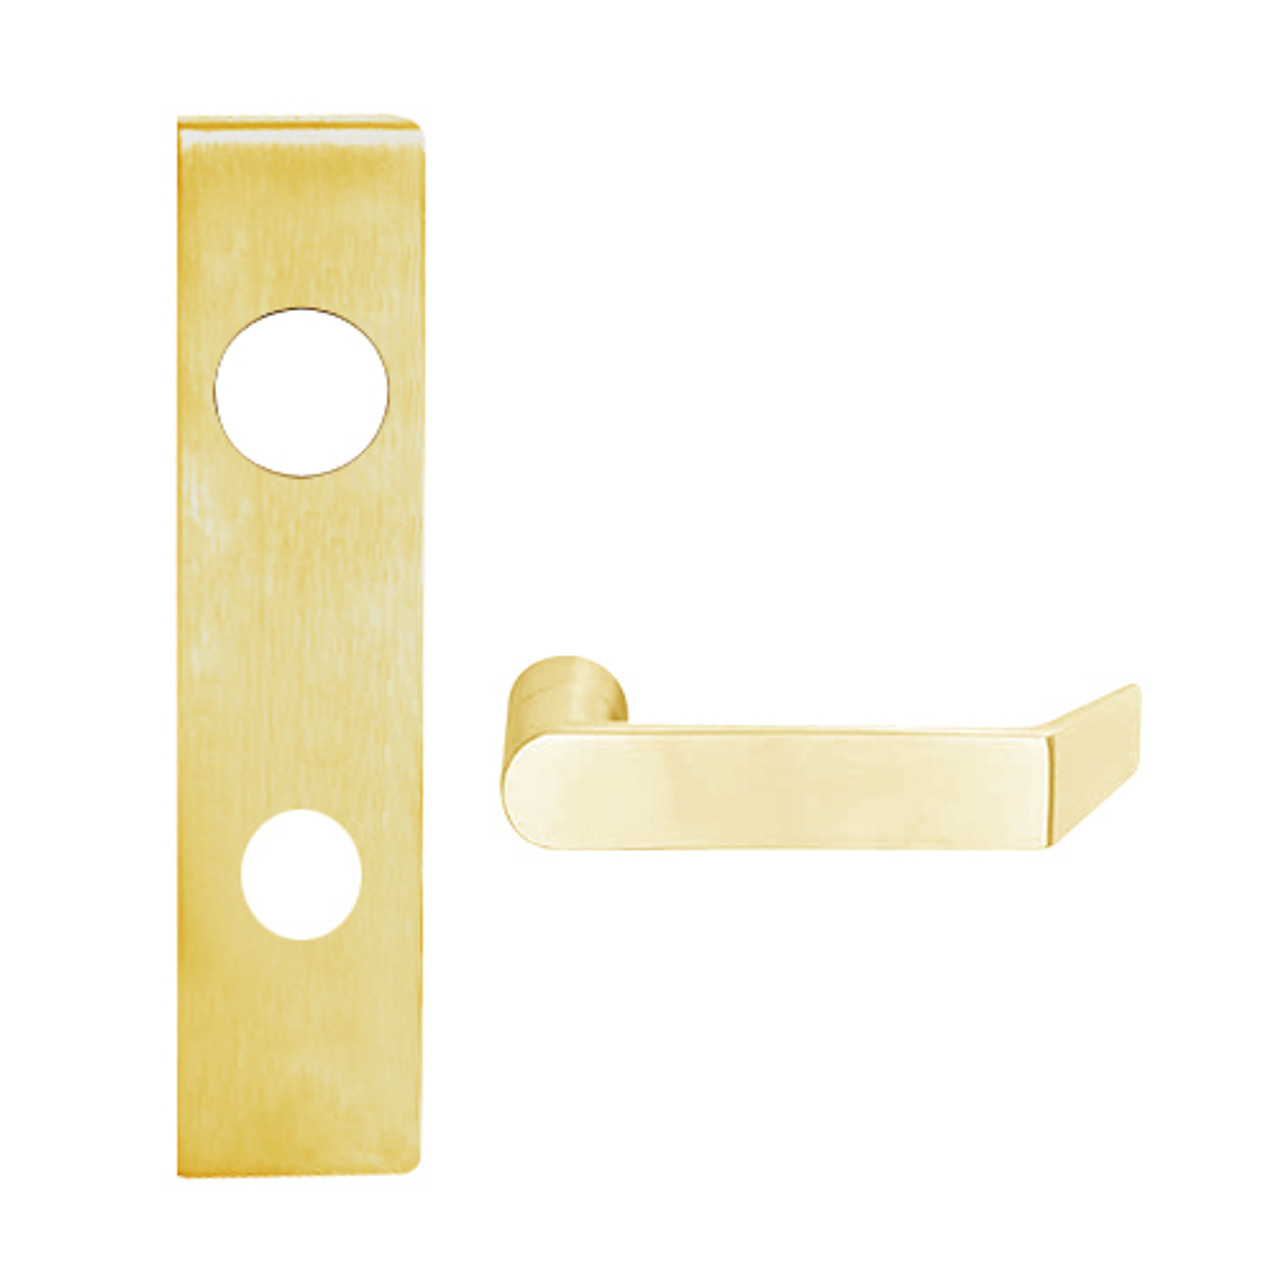 L9456J-06L-605 Schlage L Series Corridor with Deadbolt Commercial Mortise Lock with 06 Cast Lever Design Prepped for FSIC in Bright Brass